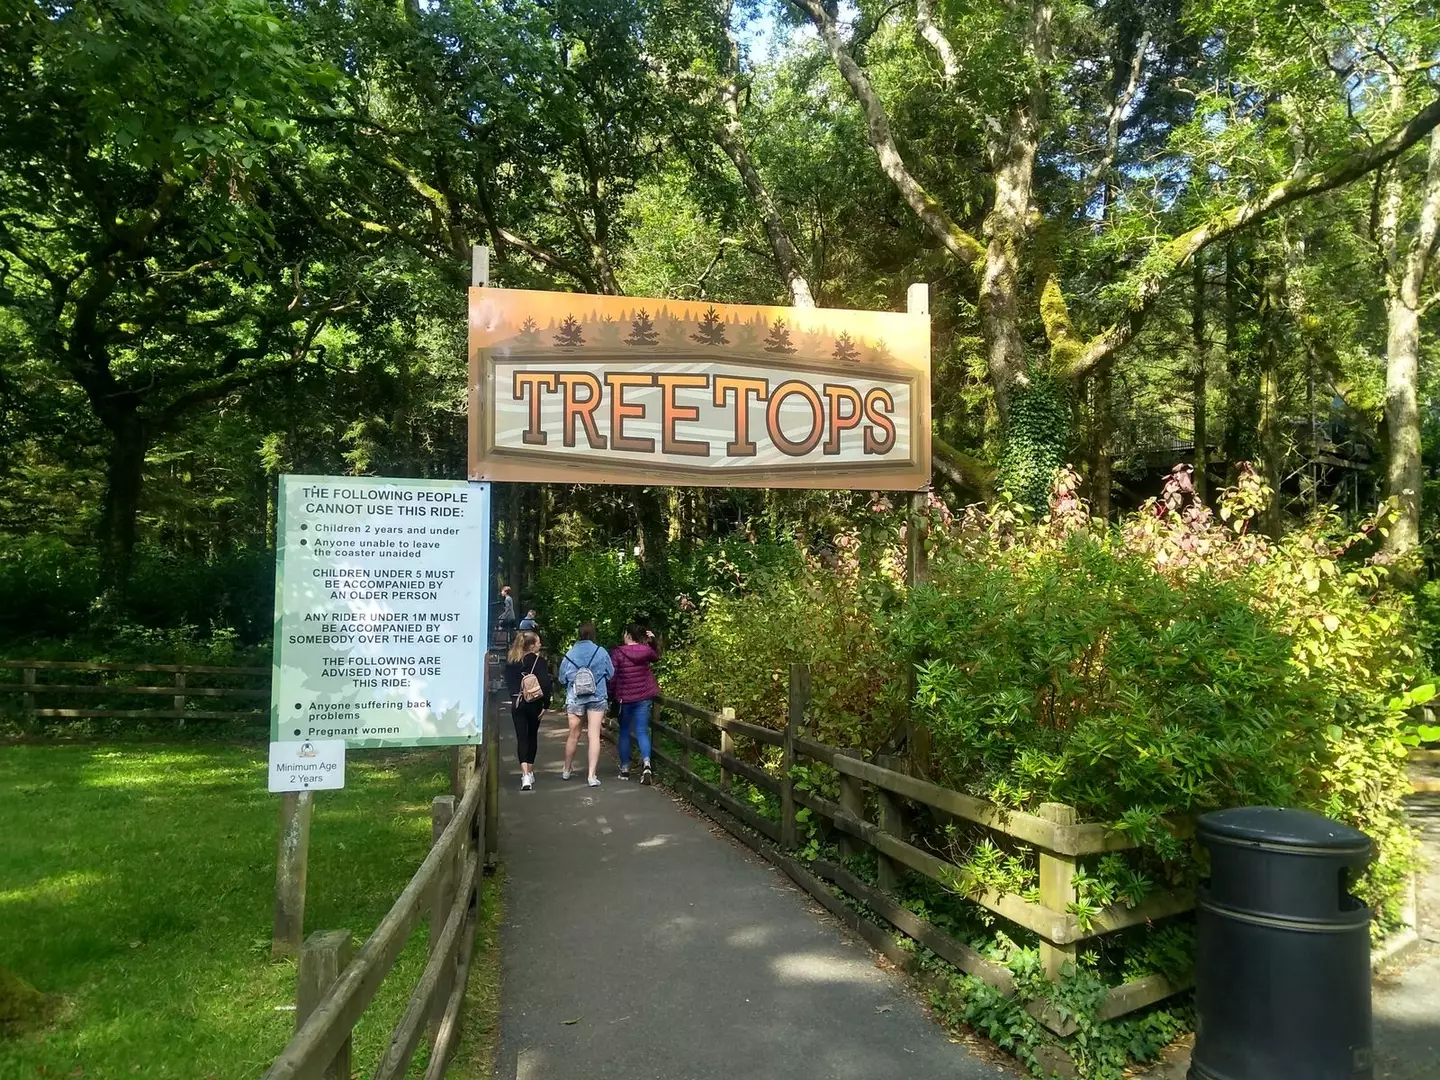 The incident is believed to have taken place on the Treetops rollercoaster.